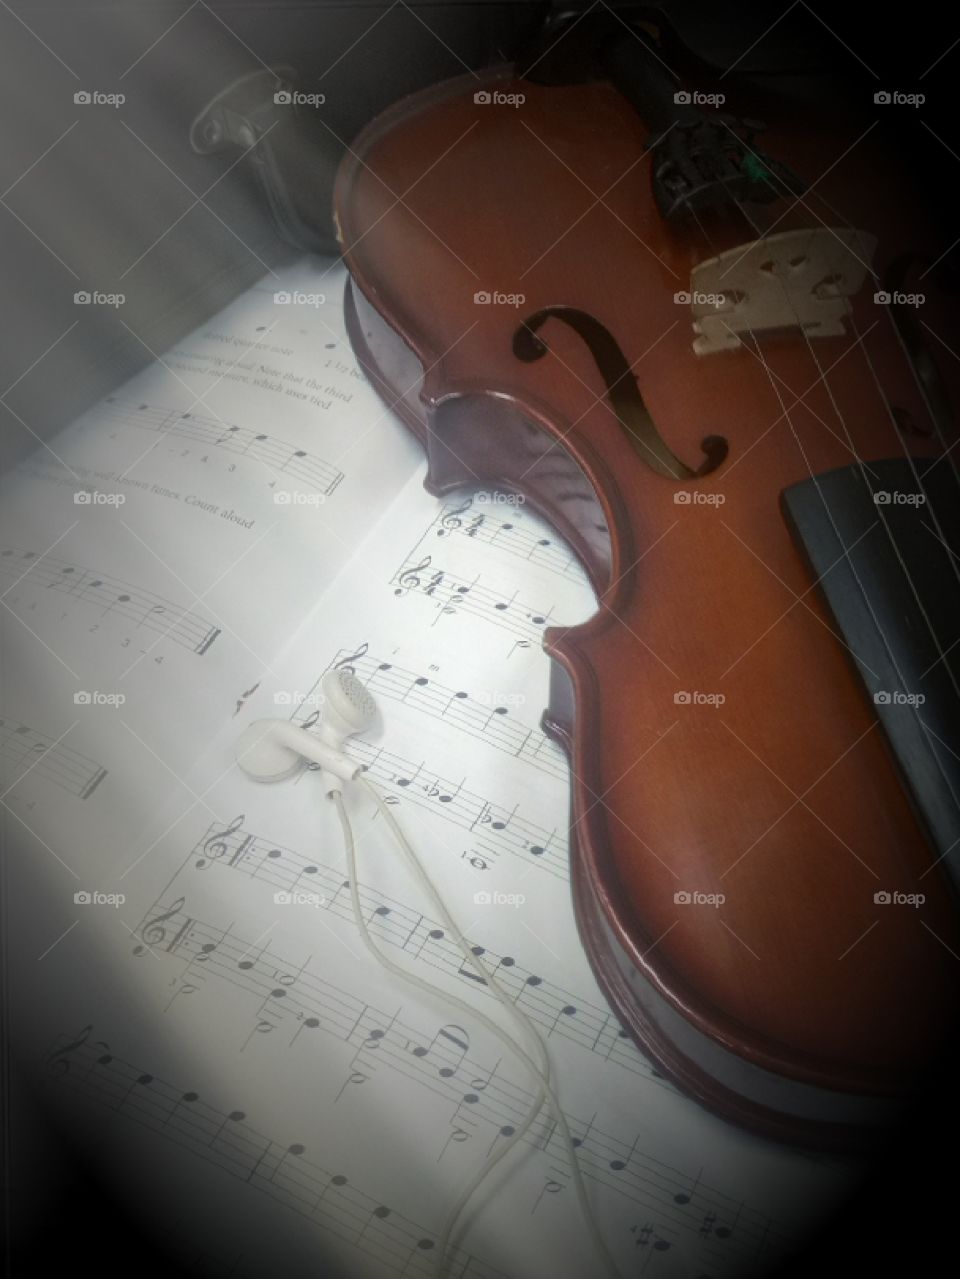 Violin and note